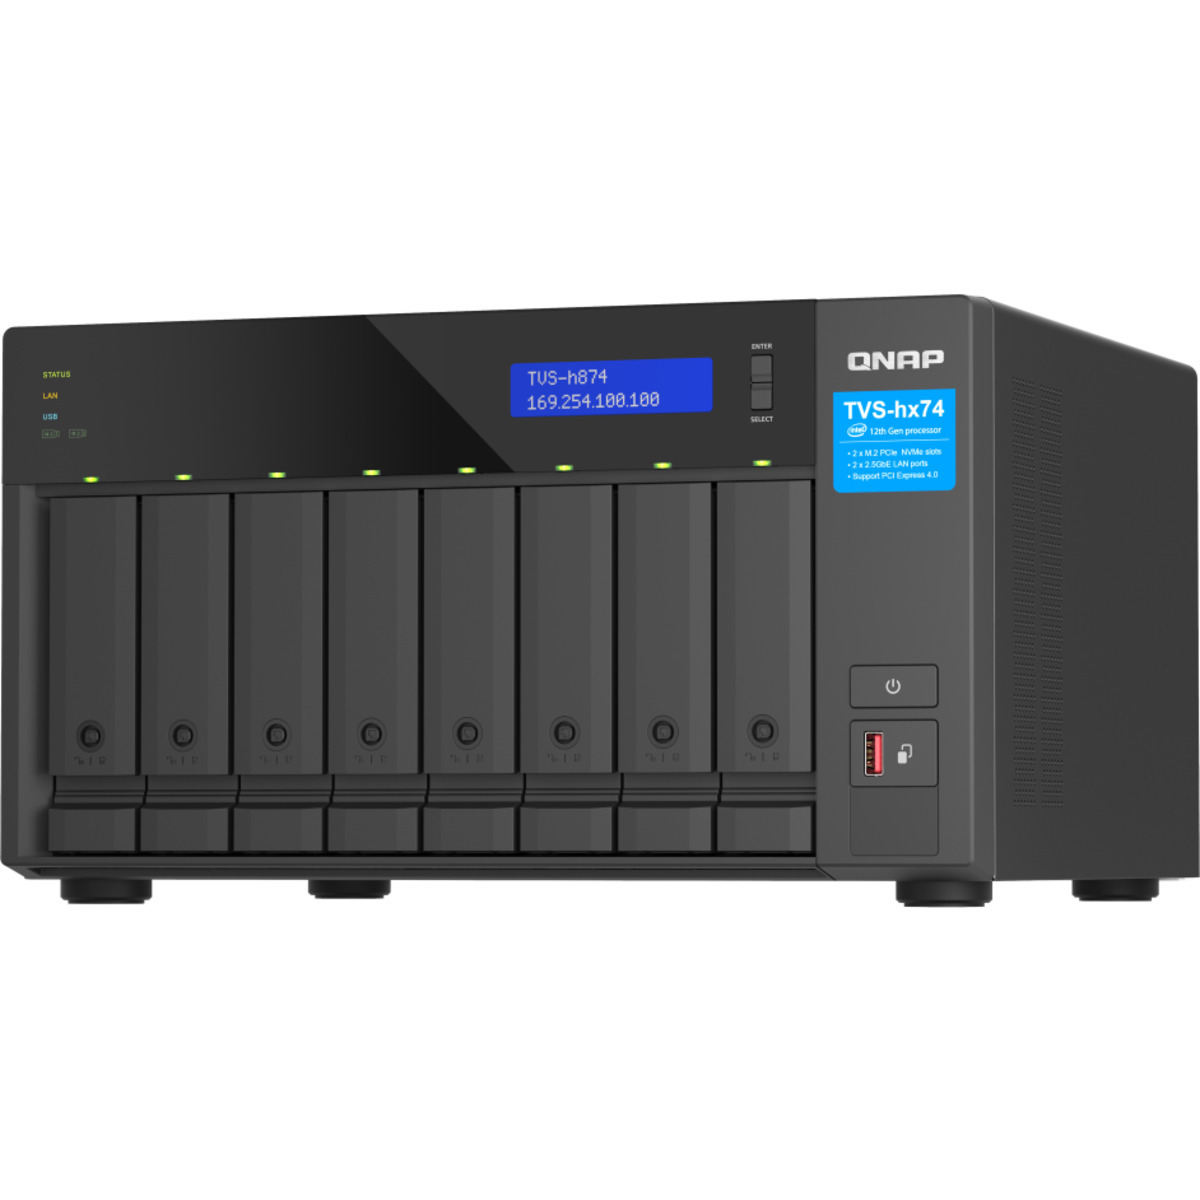 QNAP TVS-h874 Core i5 84tb 8-Bay Desktop Multimedia / Power User / Business NAS - Network Attached Storage Device 6x14tb Western Digital Ultrastar DC HC530 WUH721414ALE6L4 3.5 7200rpm SATA 6Gb/s HDD ENTERPRISE Class Drives Installed - Burn-In Tested TVS-h874 Core i5